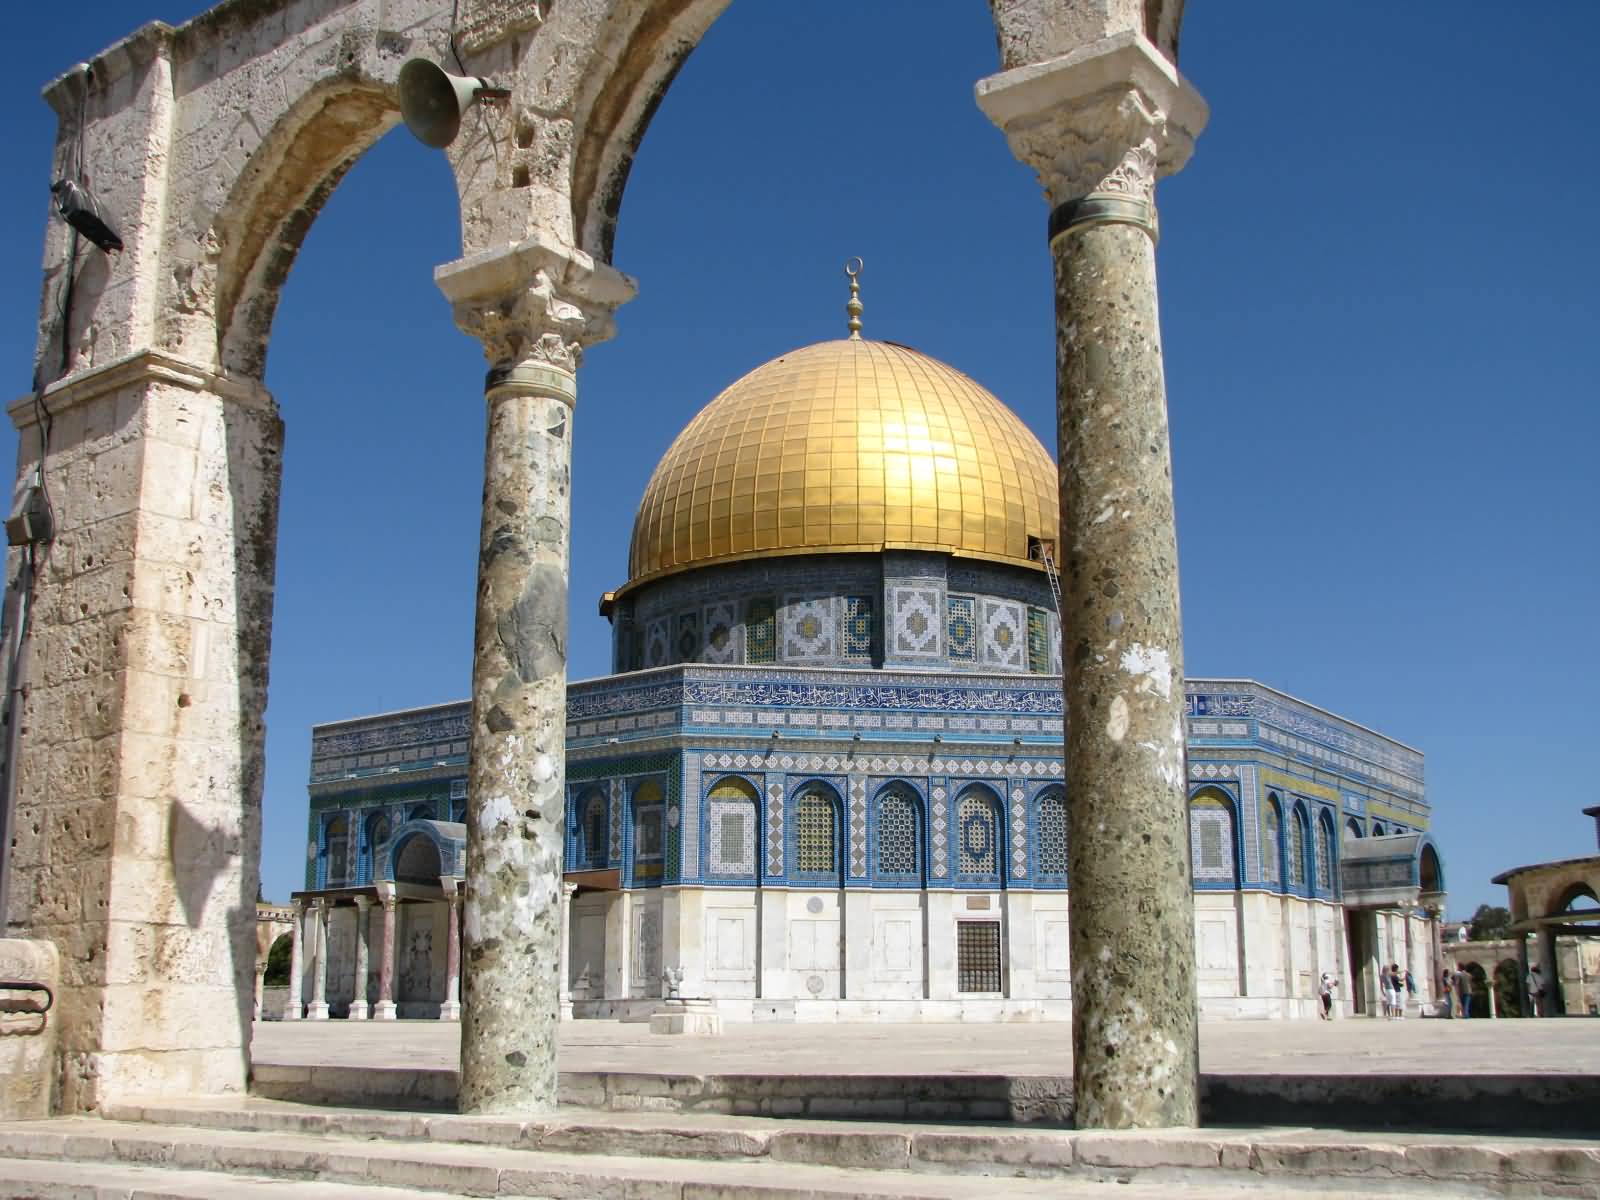 External View Of The Dome Of The Rock From The Southeast